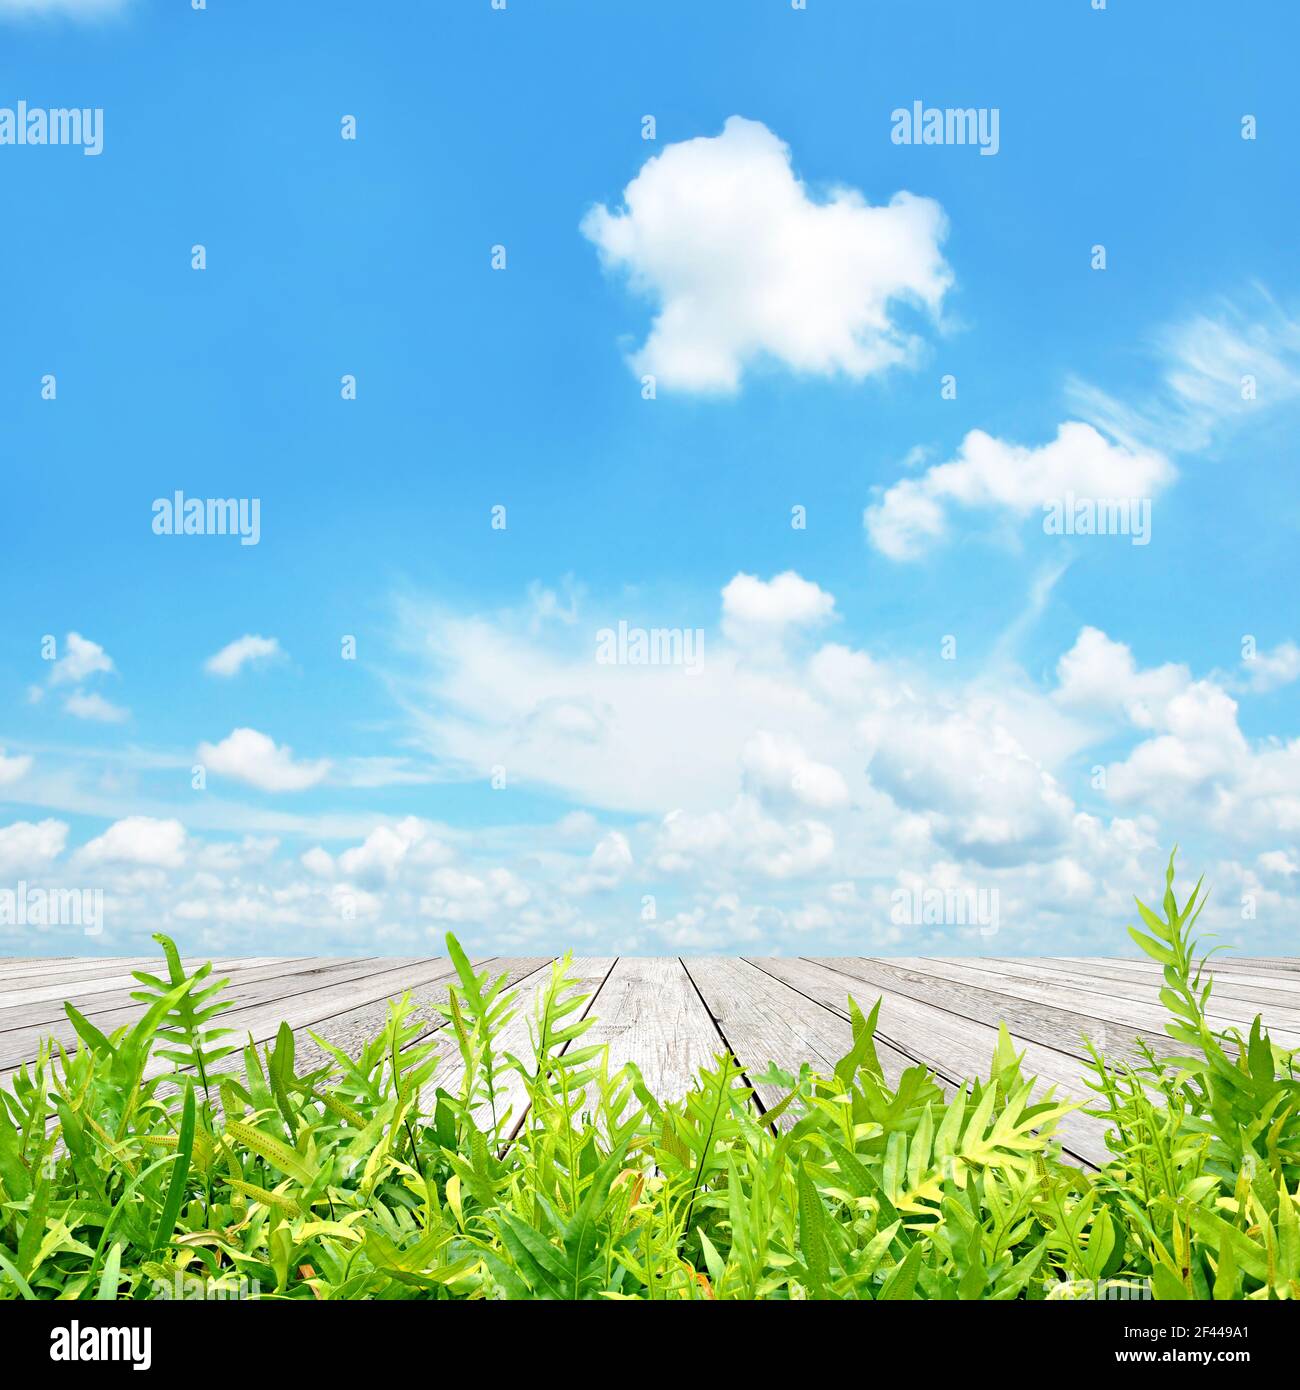 Green fern leaves with wood plank on blue sky background Stock Photo